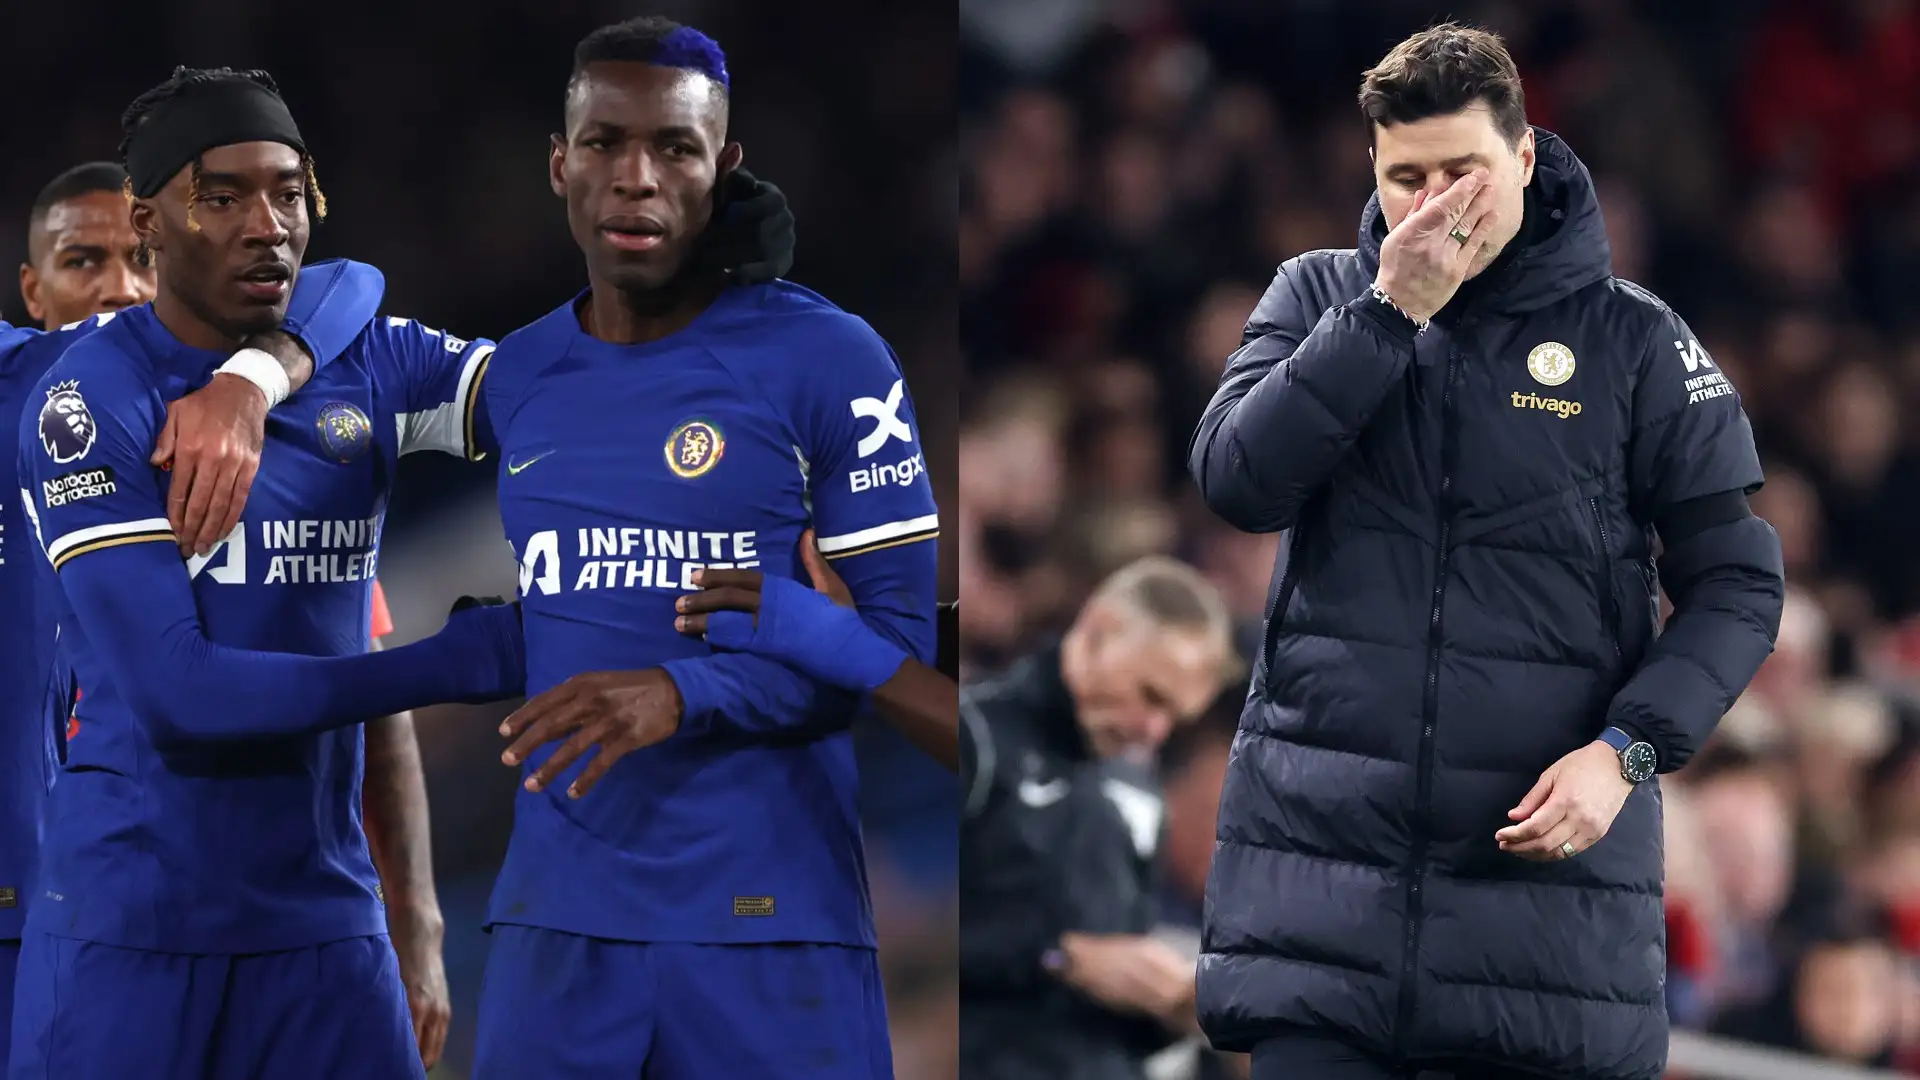 Revealed: Mauricio Pochettino exit sparks Chelsea squad 'meltdown' on WhatsApp as players had 'no idea' announcement was coming